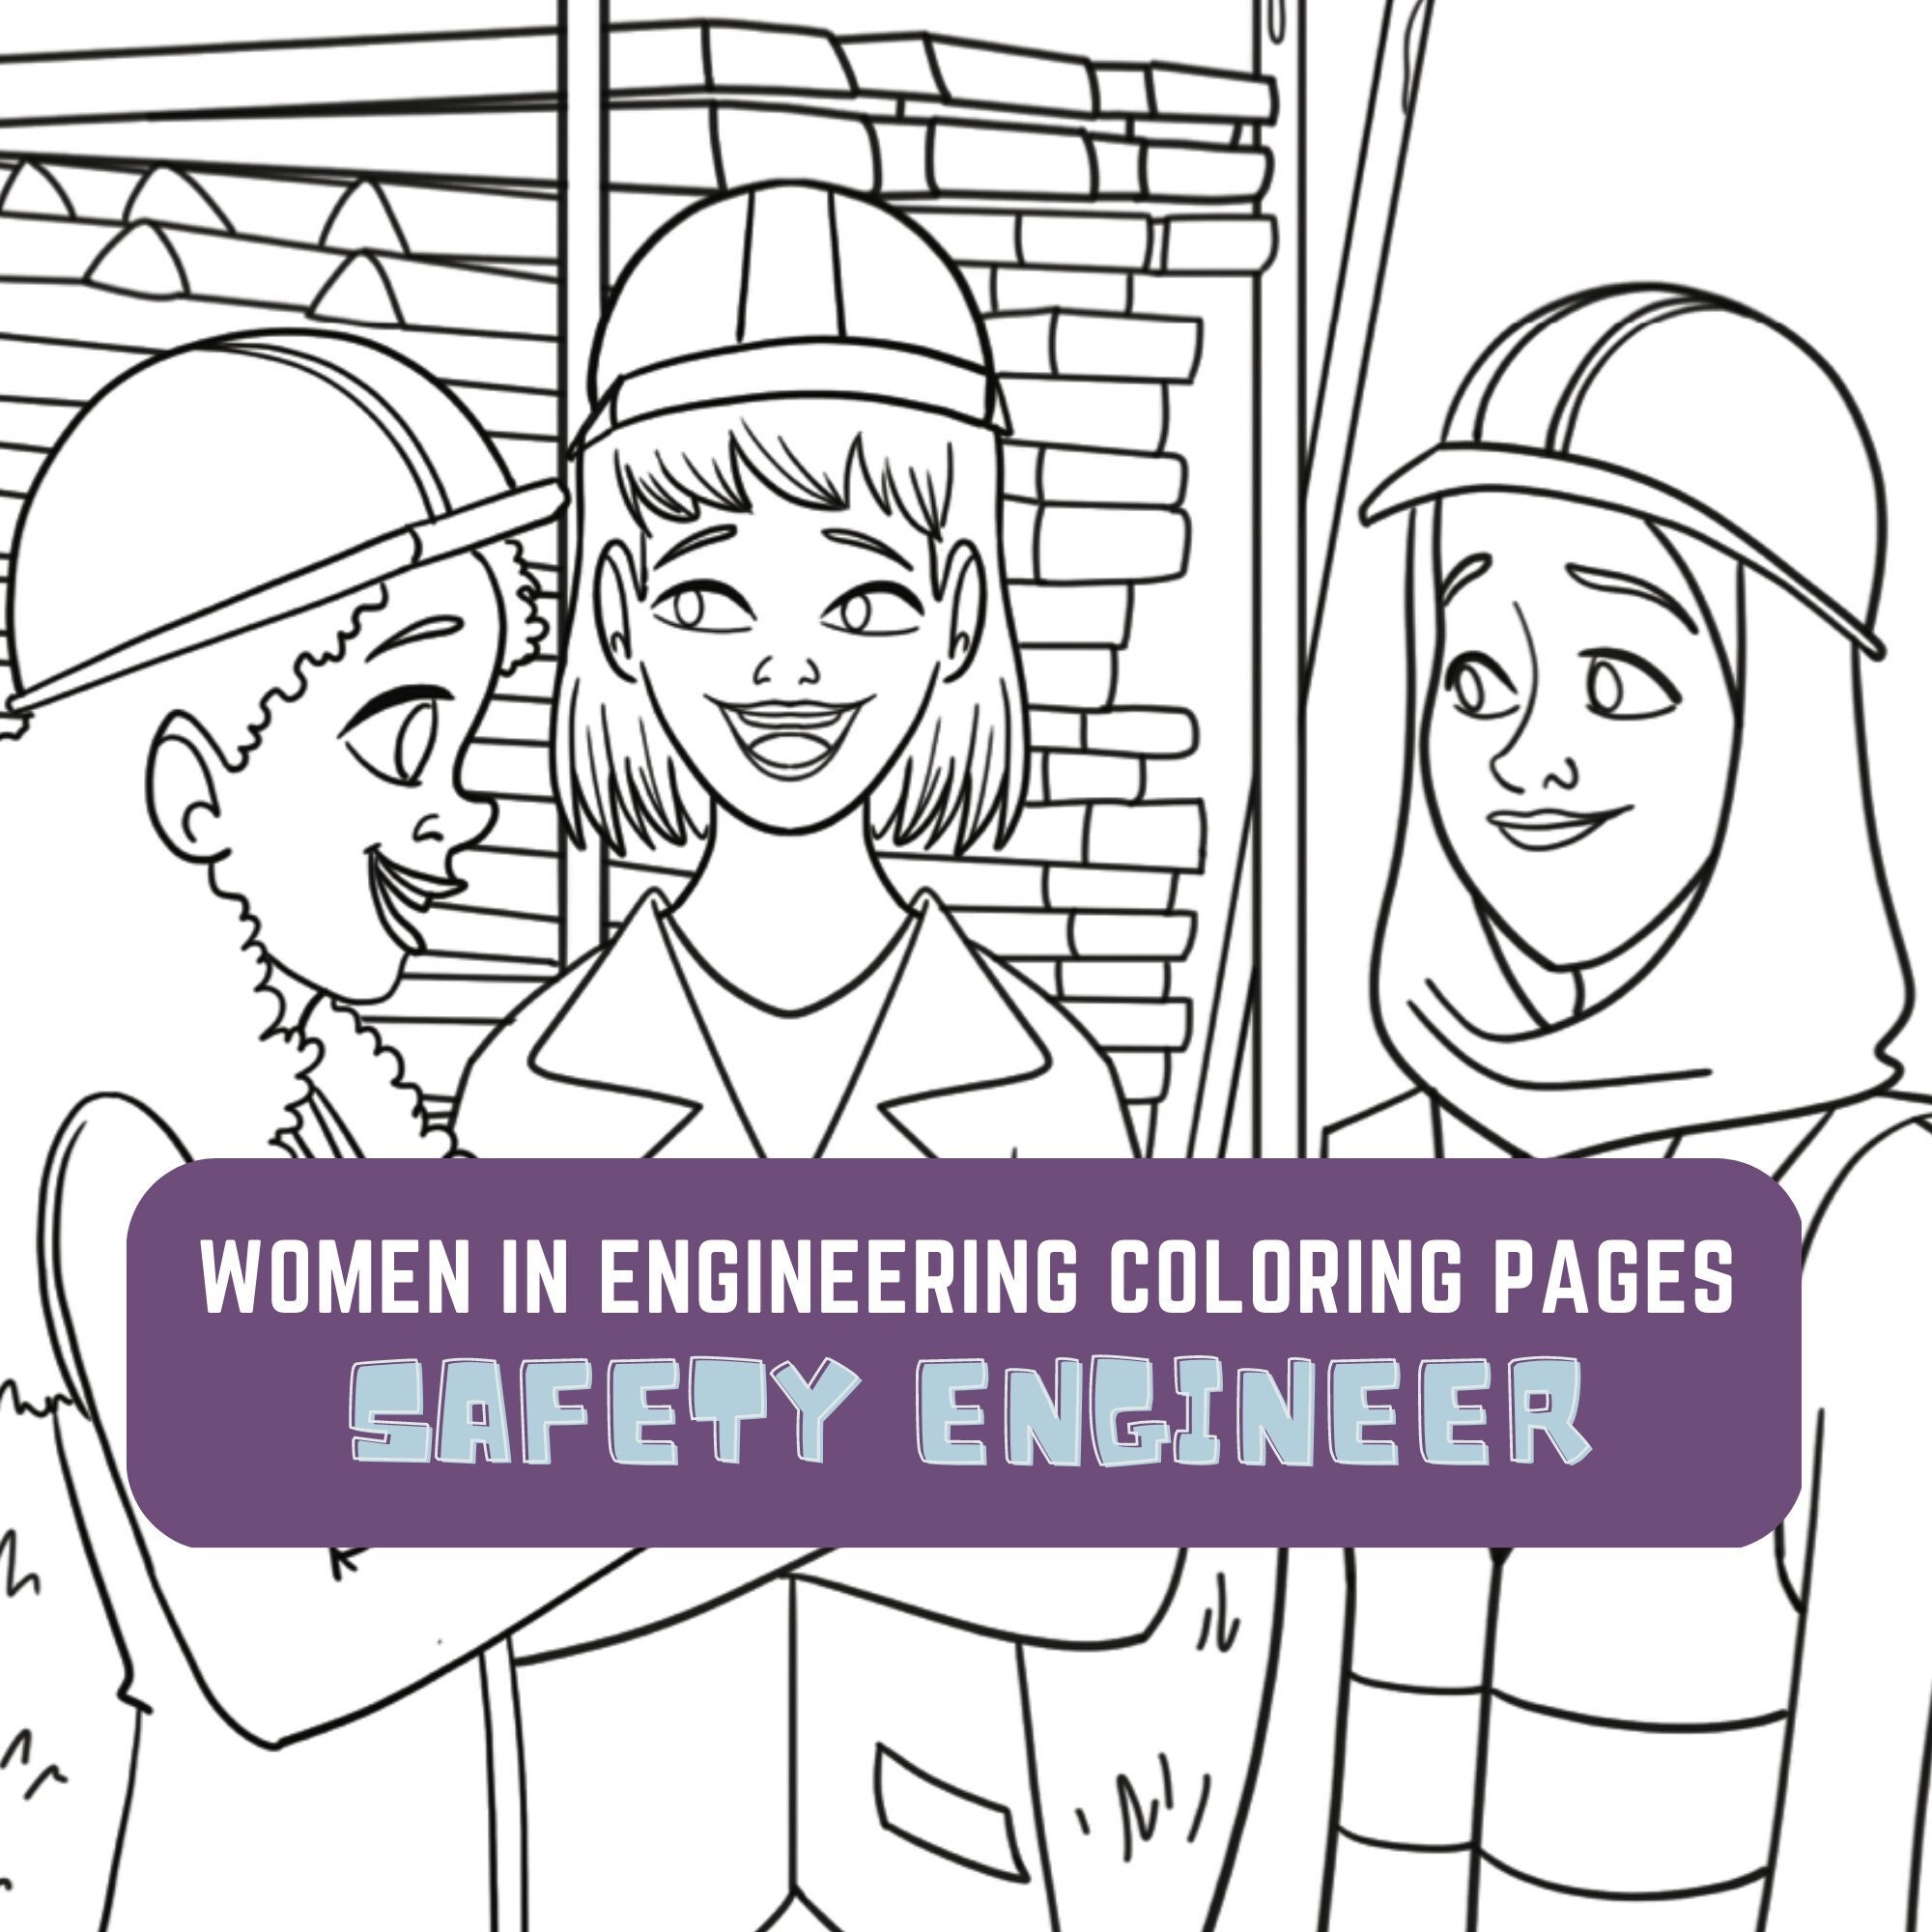 Safety engineer kids coloring page women in stem activity stem activity classroom resource career exploration